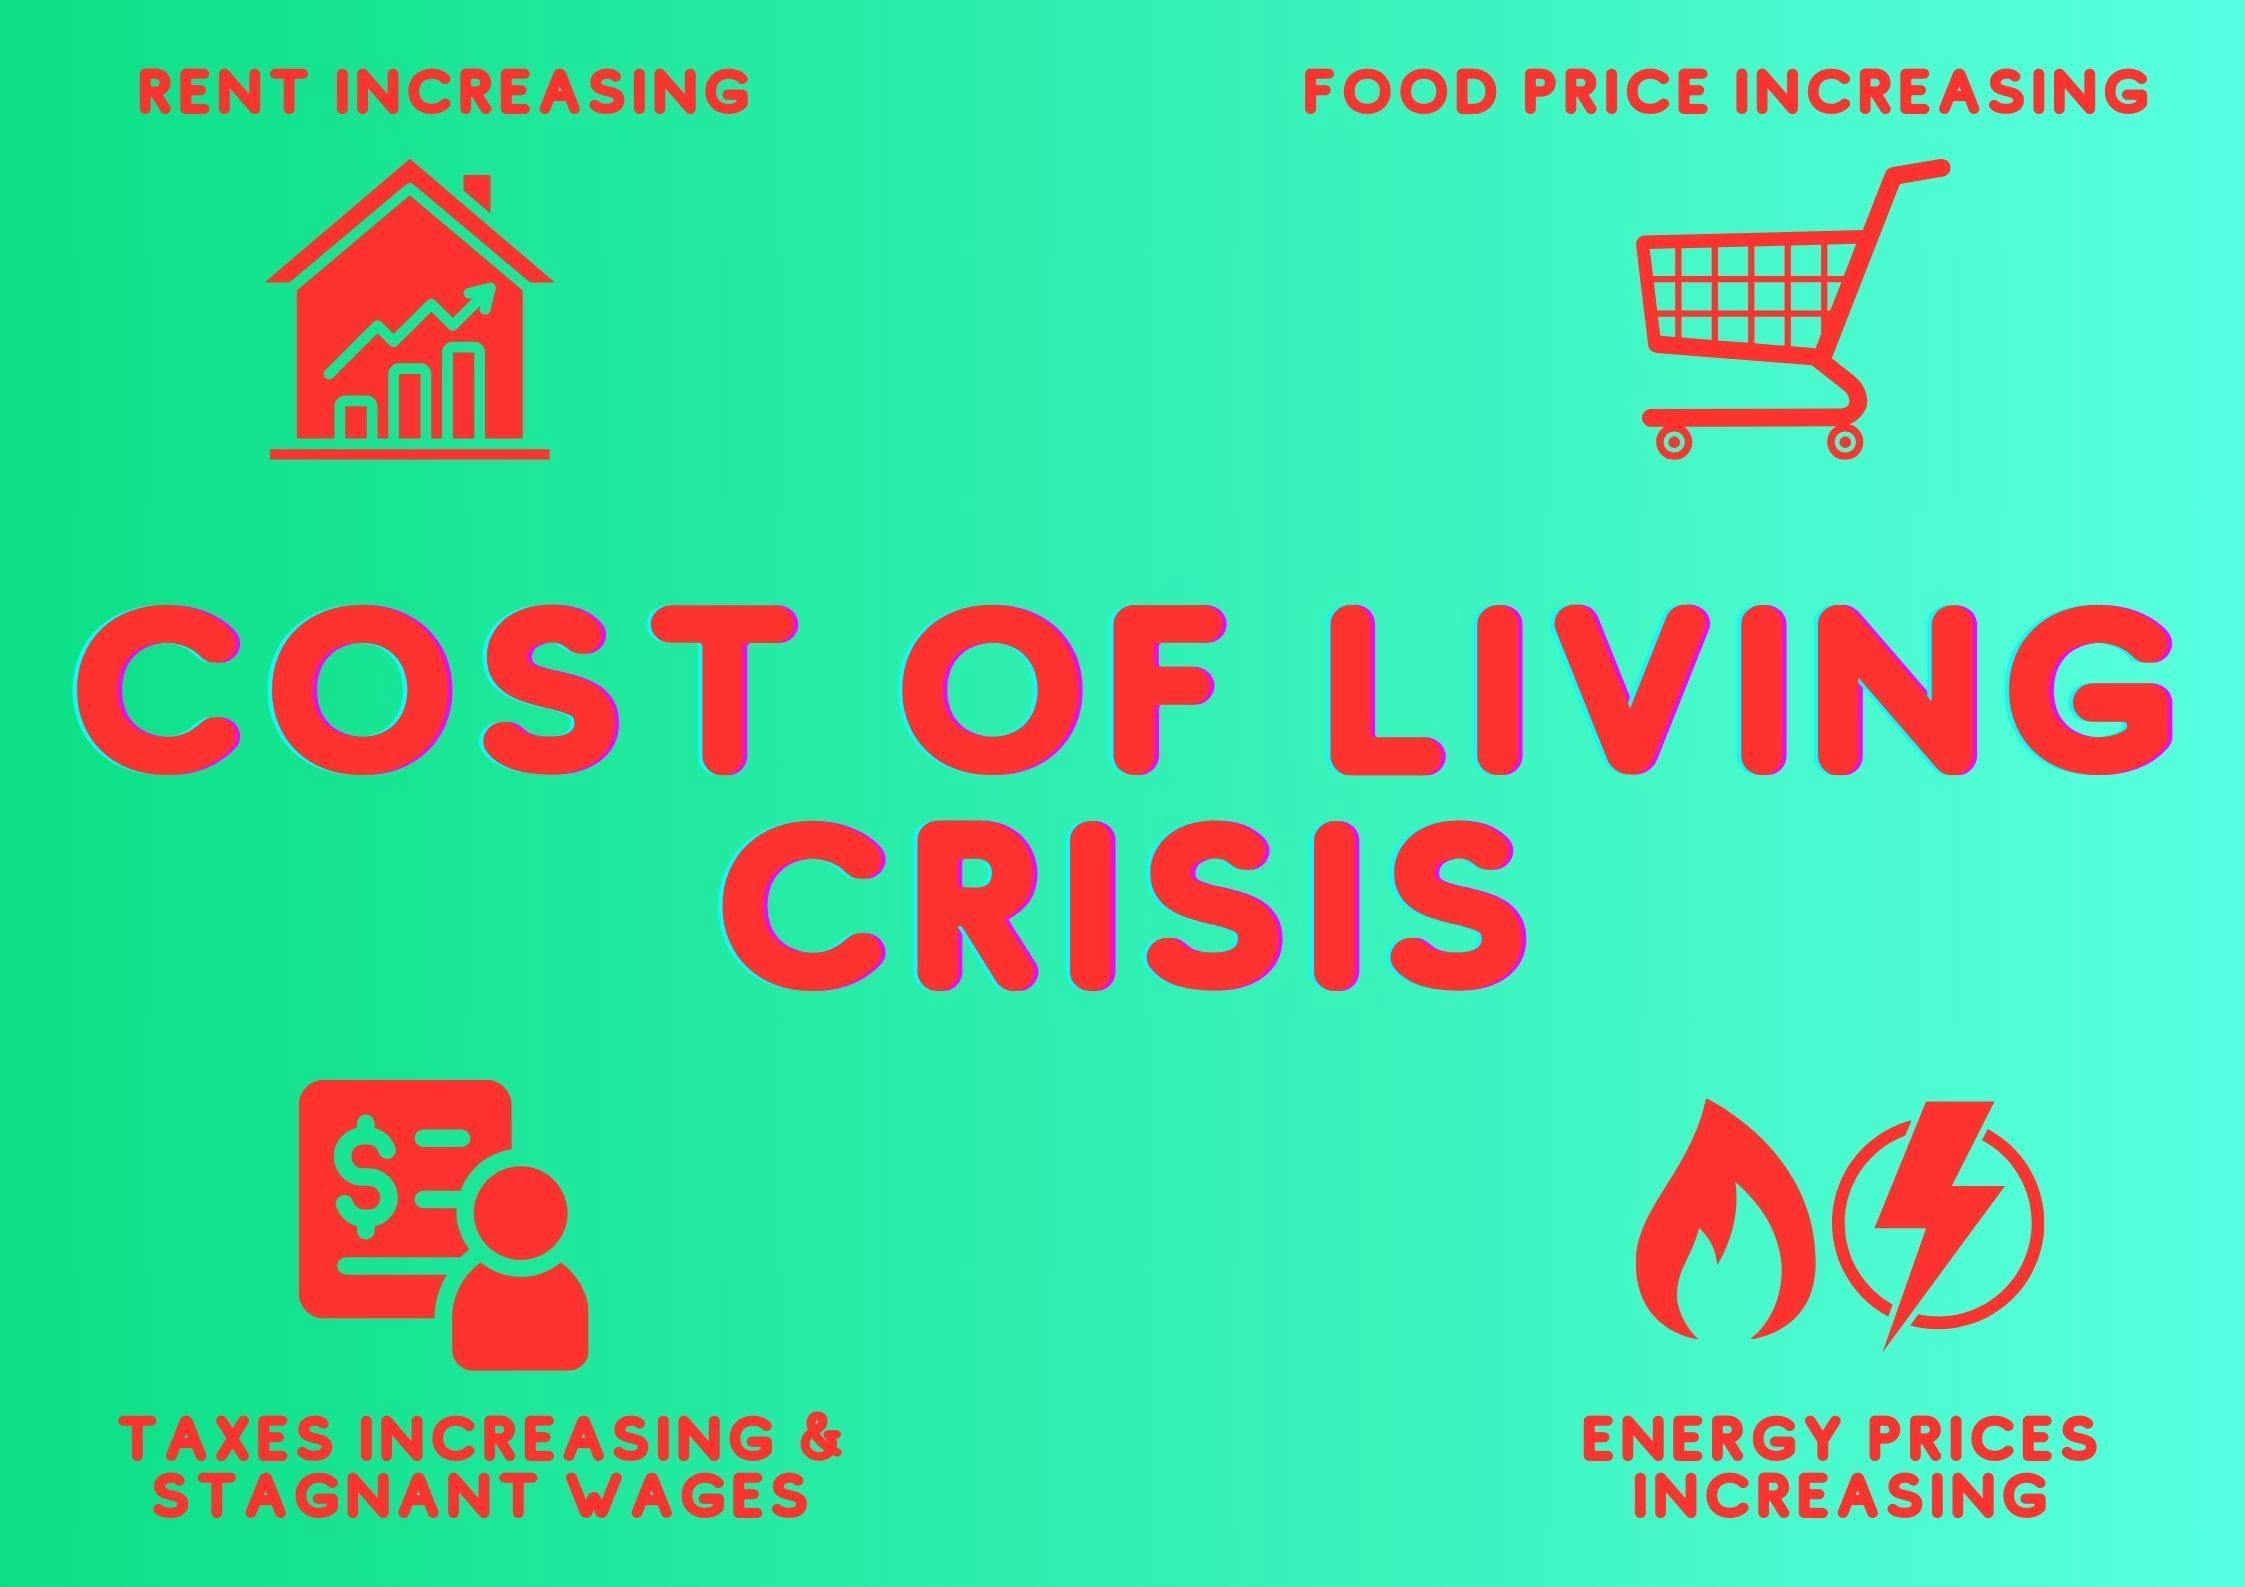 Cost of living crisis banner with 4 icons depicting; rent increasing, food price increasing, taxes increasing & stagnant wages, and energy prices increasing